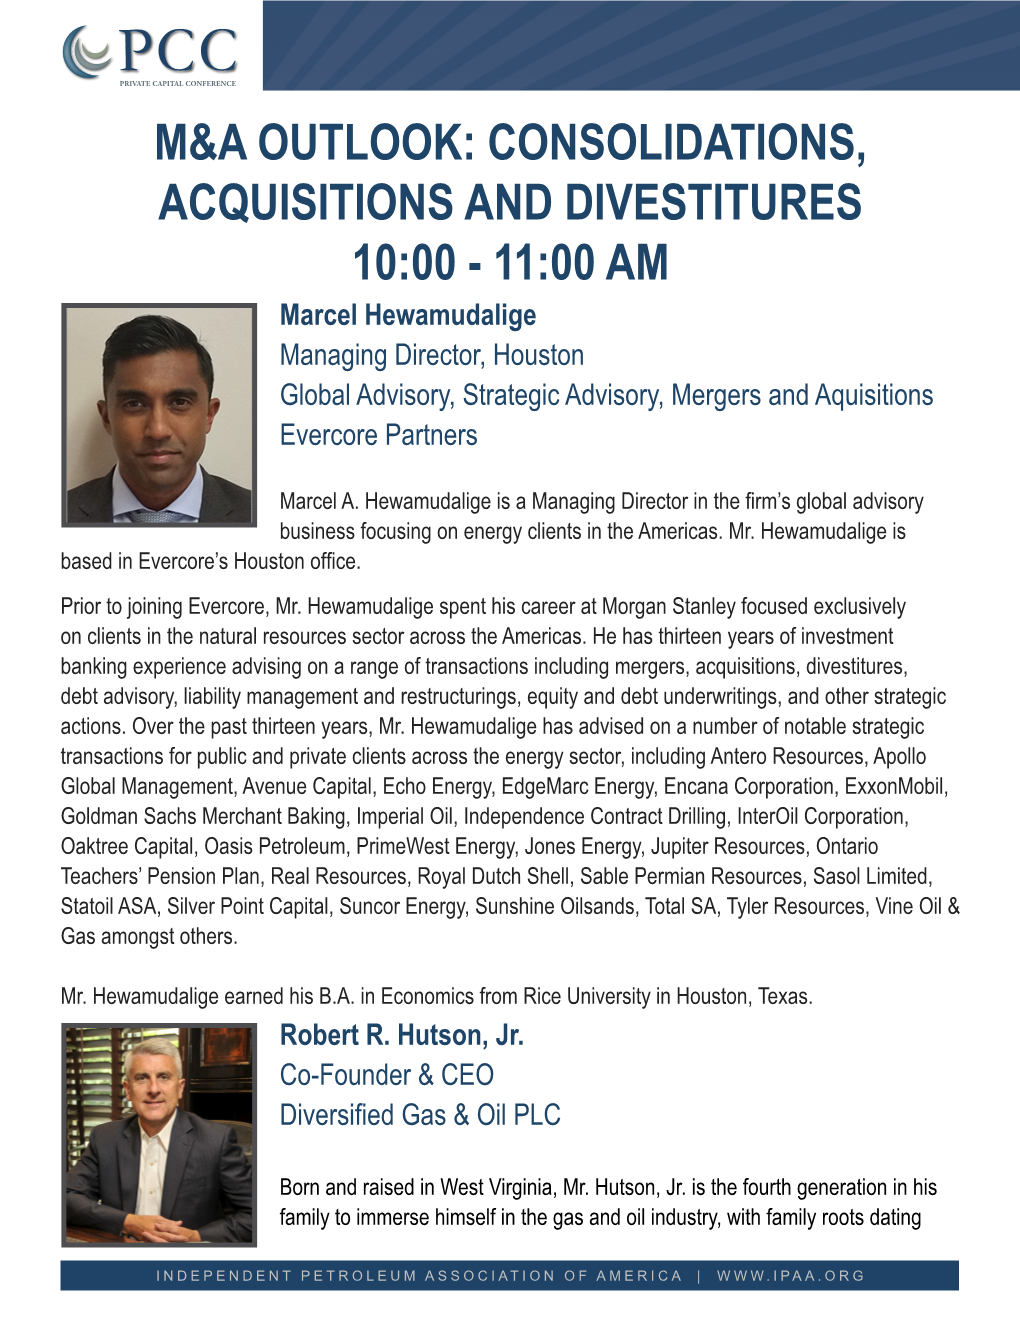 M&A Outlook: Consolidations, Acquisitions and Divestitures 10:00